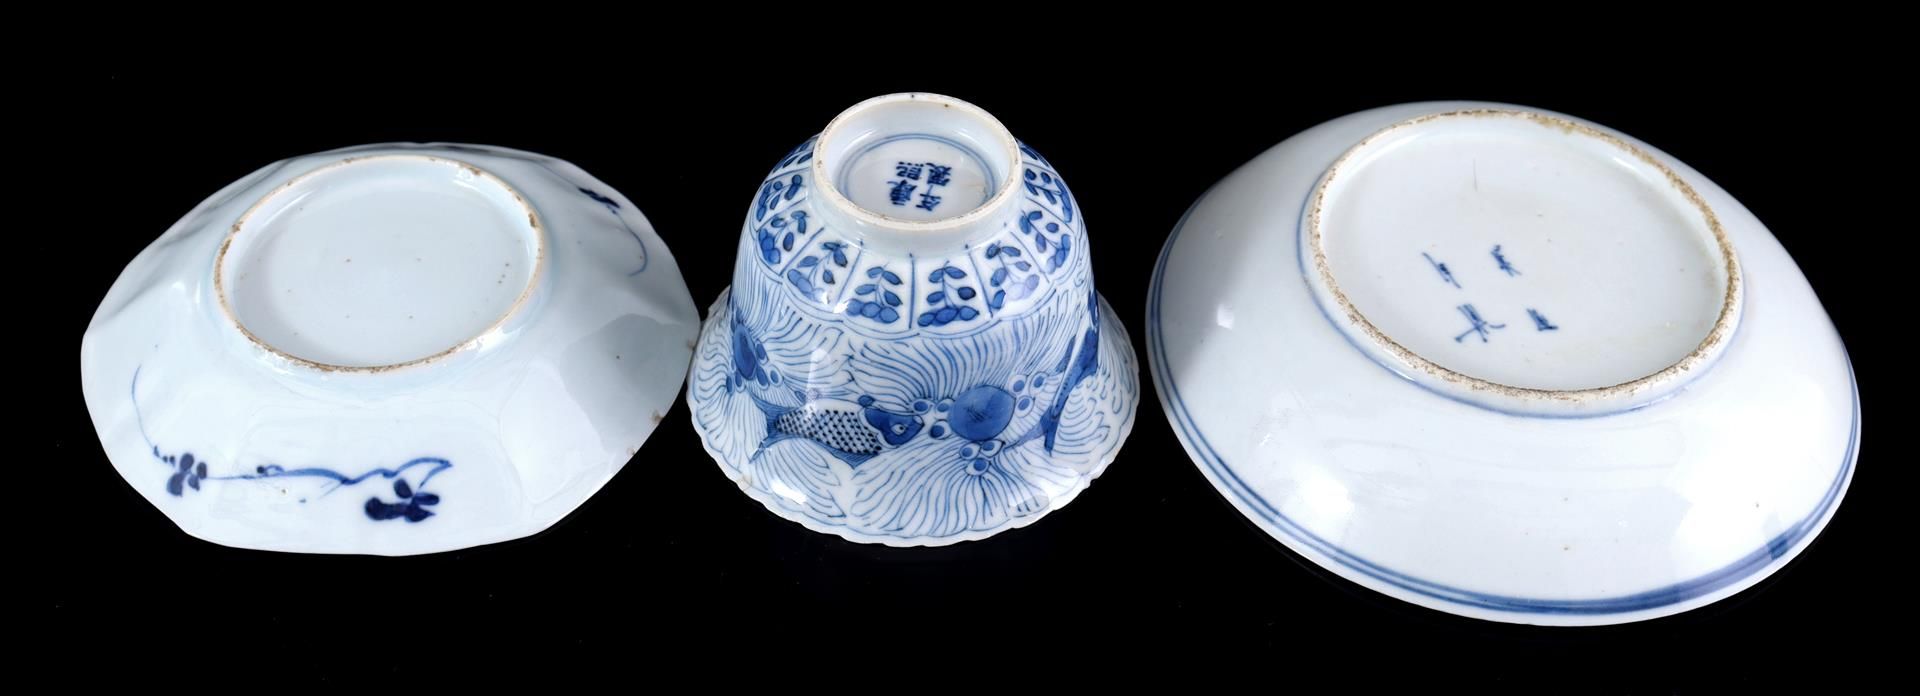 Lot of Japanese and Chinese porcelain from the 18th century - Bild 4 aus 4